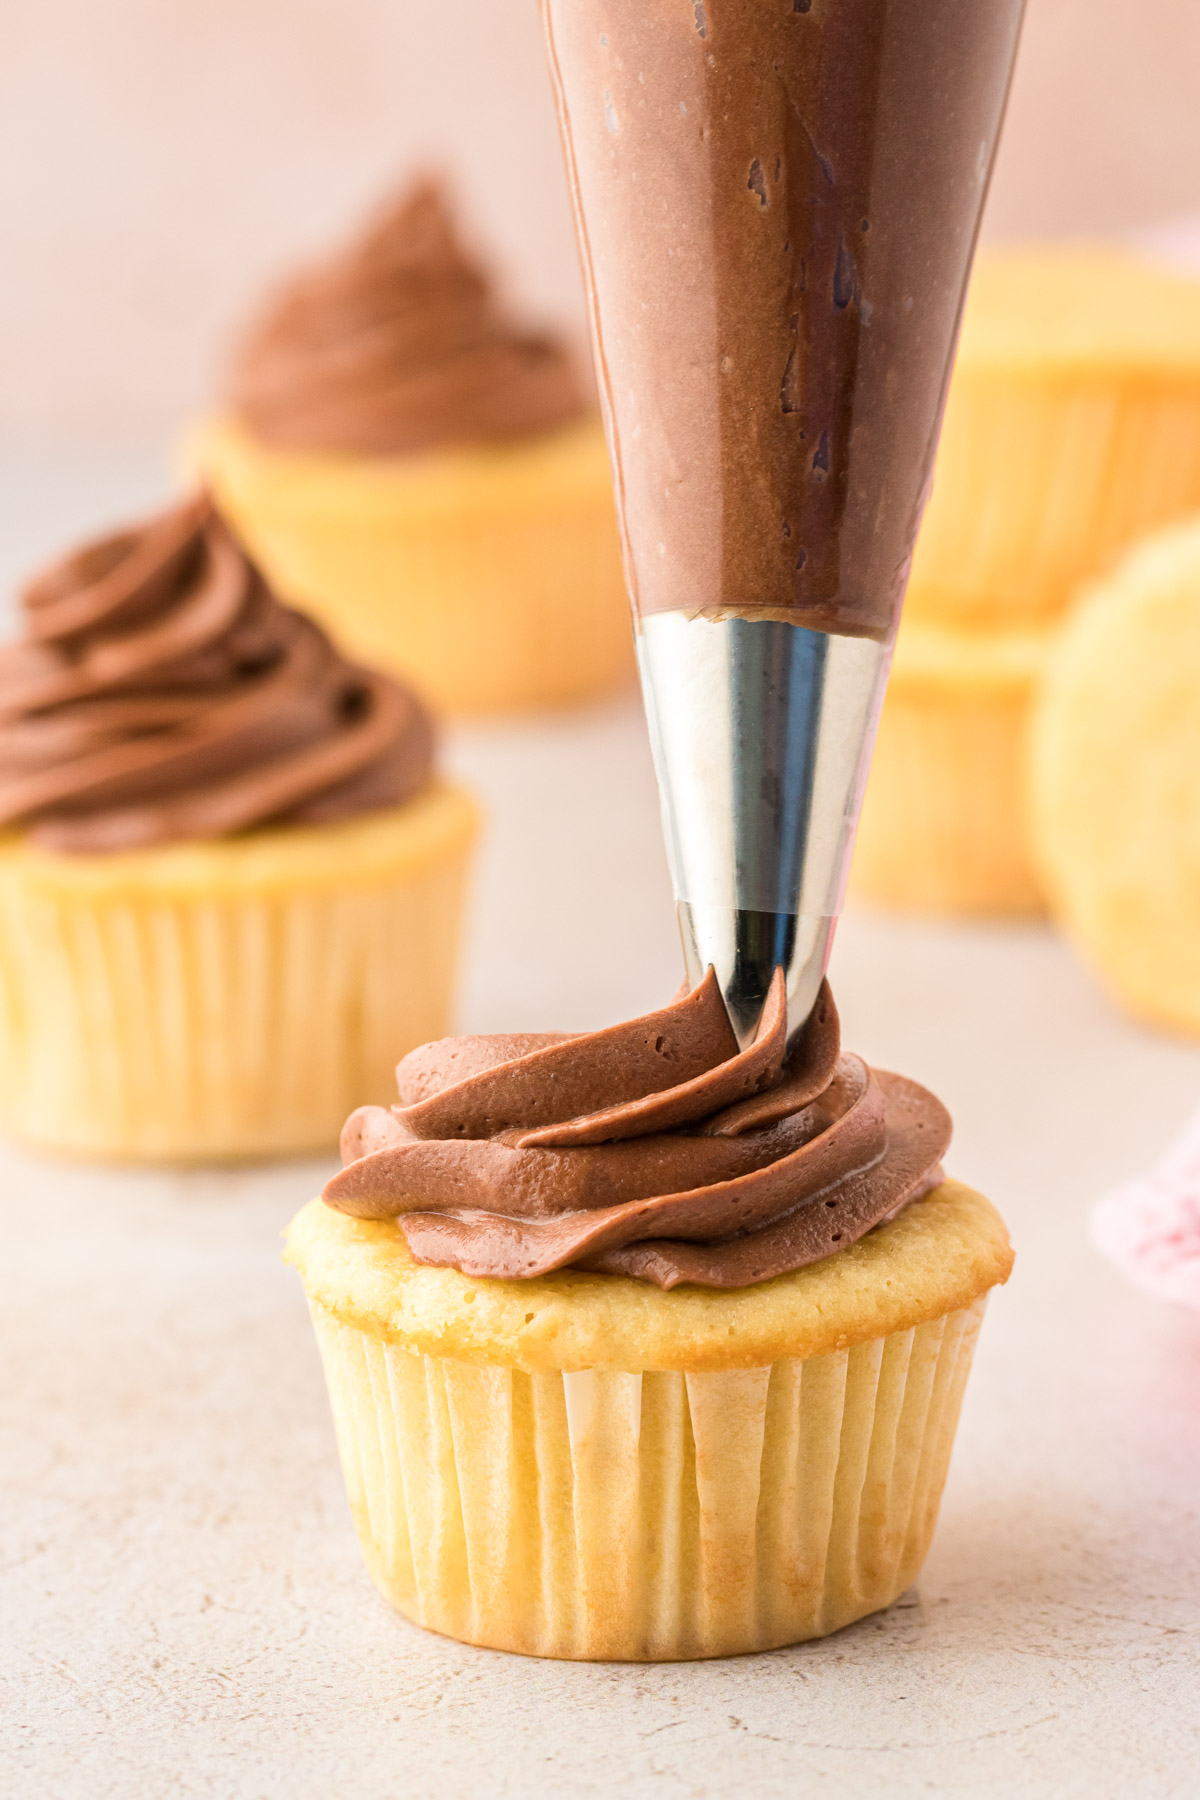 Chocolate cream cheese frosting being piped onto a yellow cupcake.